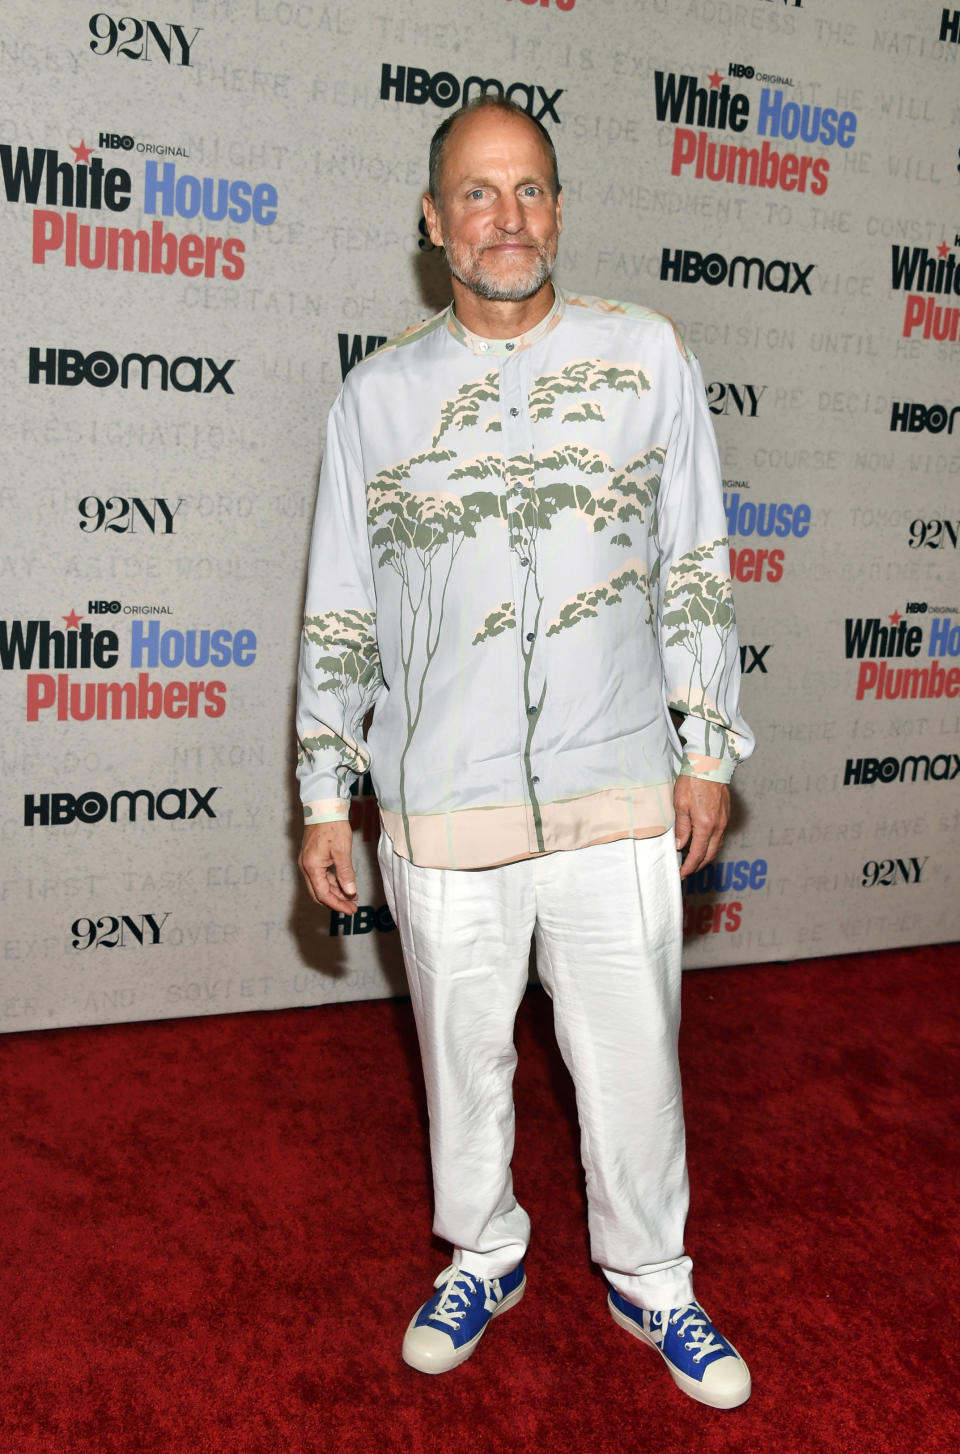 Woody Harrelson attends the premiere of HBO's "White House Plumbers," at the 92nd Street Y, Monday, April 17, 2023, in New York. (Photo by Evan Agostini/Invision/AP)